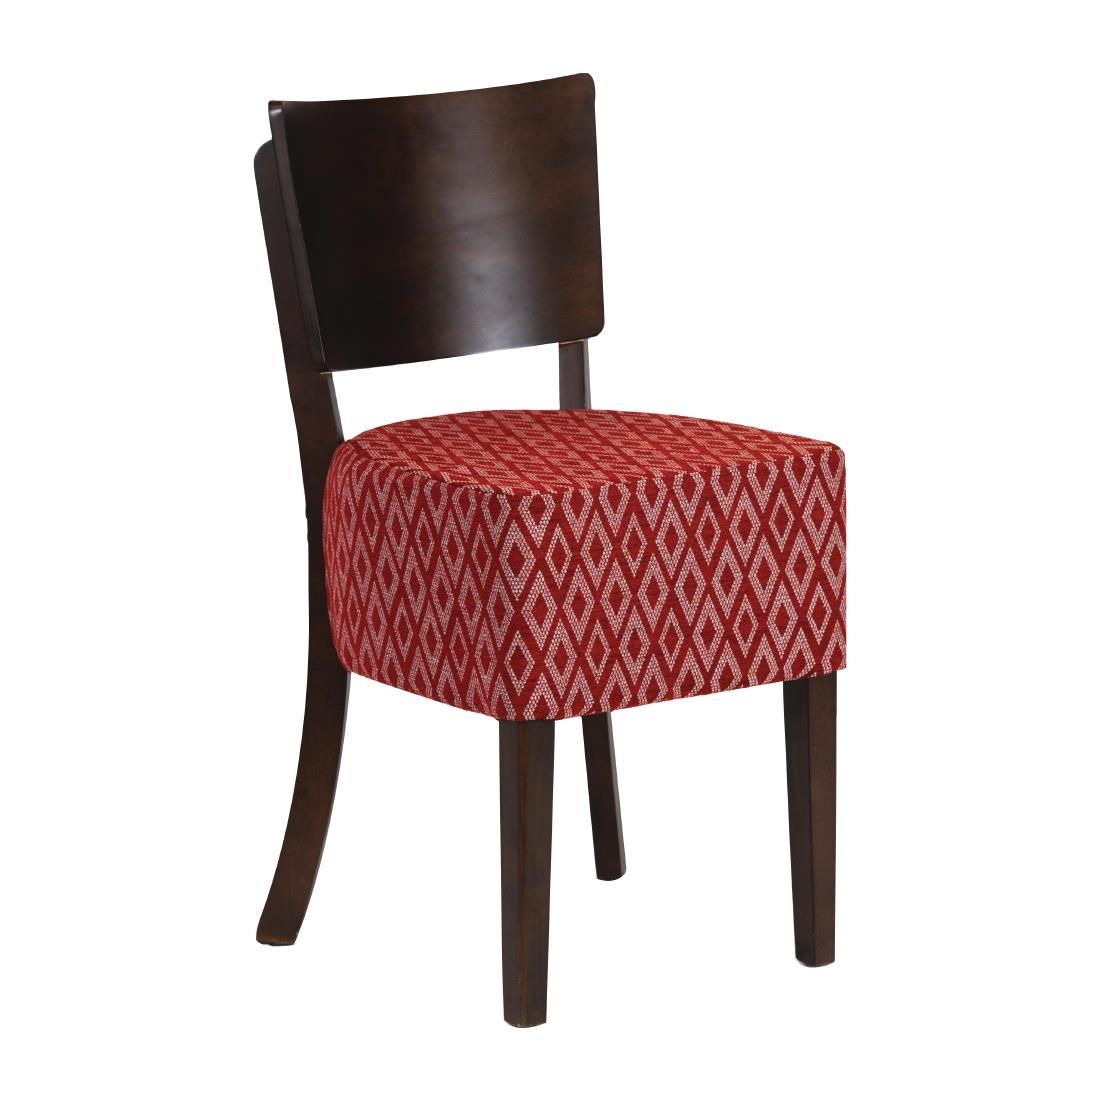 Asti Padded Dark Walnut Dining Chair with Red Diamond Deep Padded Seat and Back (Pack of 2) - FT420  - 1